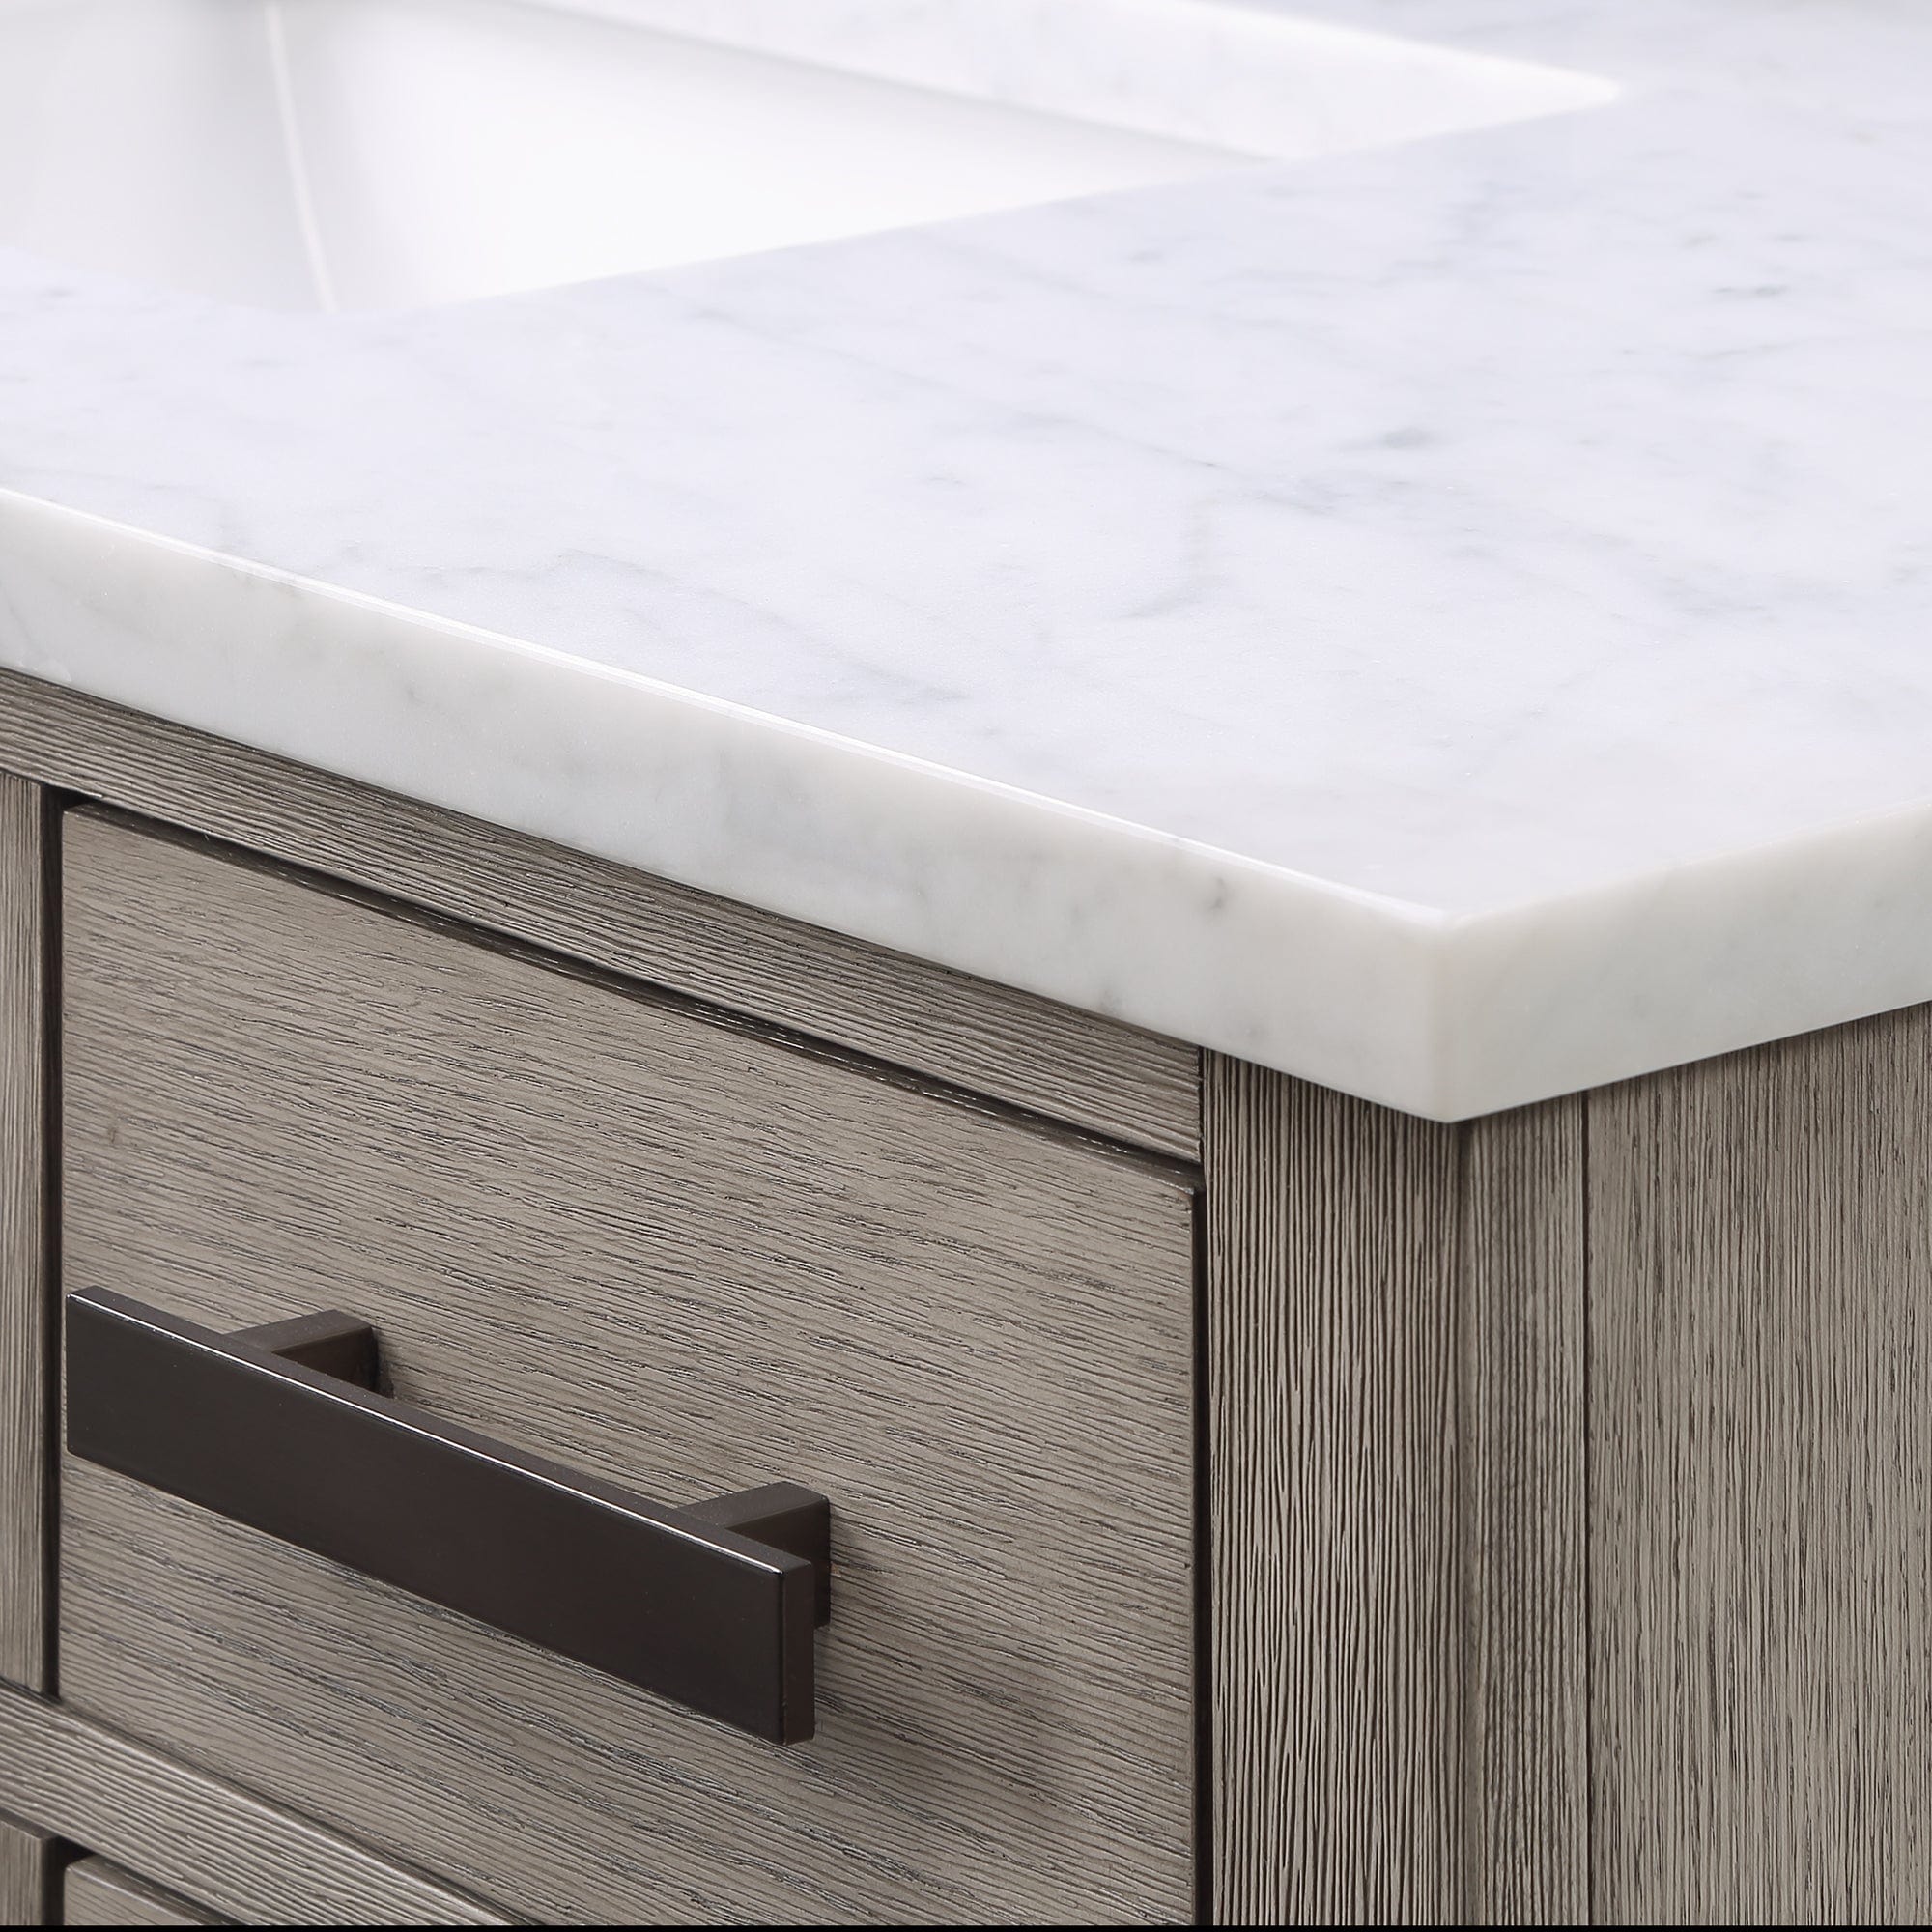 Chestnut 48 In. Single Sink Carrara White Marble Countertop Vanity In Grey Oak with Mirror - Molaix732030764712CH48CW03GK-R21000000